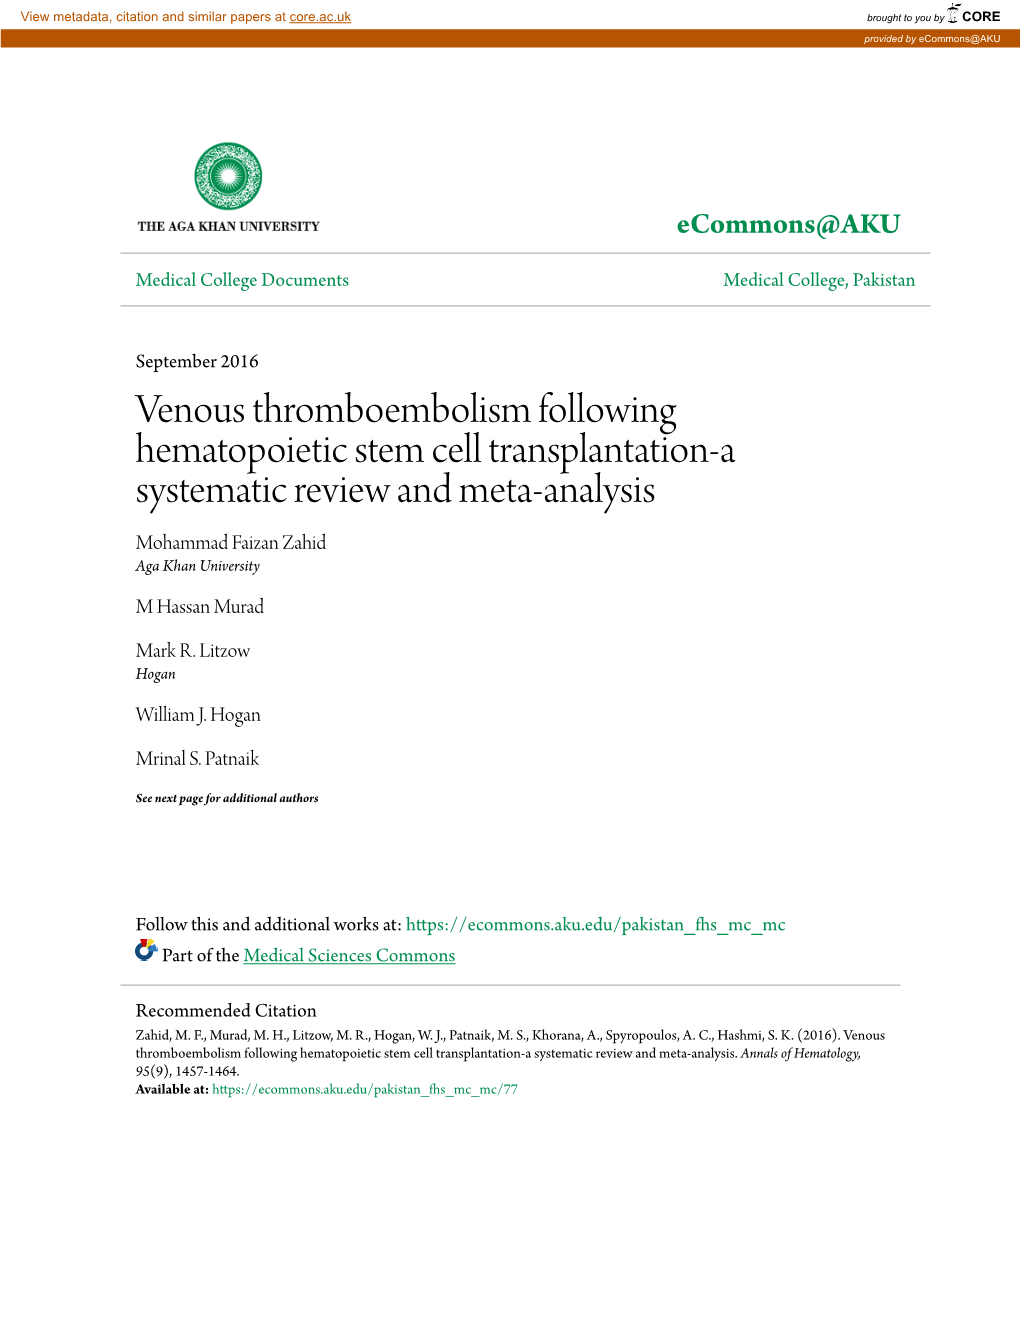 Venous Thromboembolism Following Hematopoietic Stem Cell Transplantation-A Systematic Review and Meta-Analysis Mohammad Faizan Zahid Aga Khan University